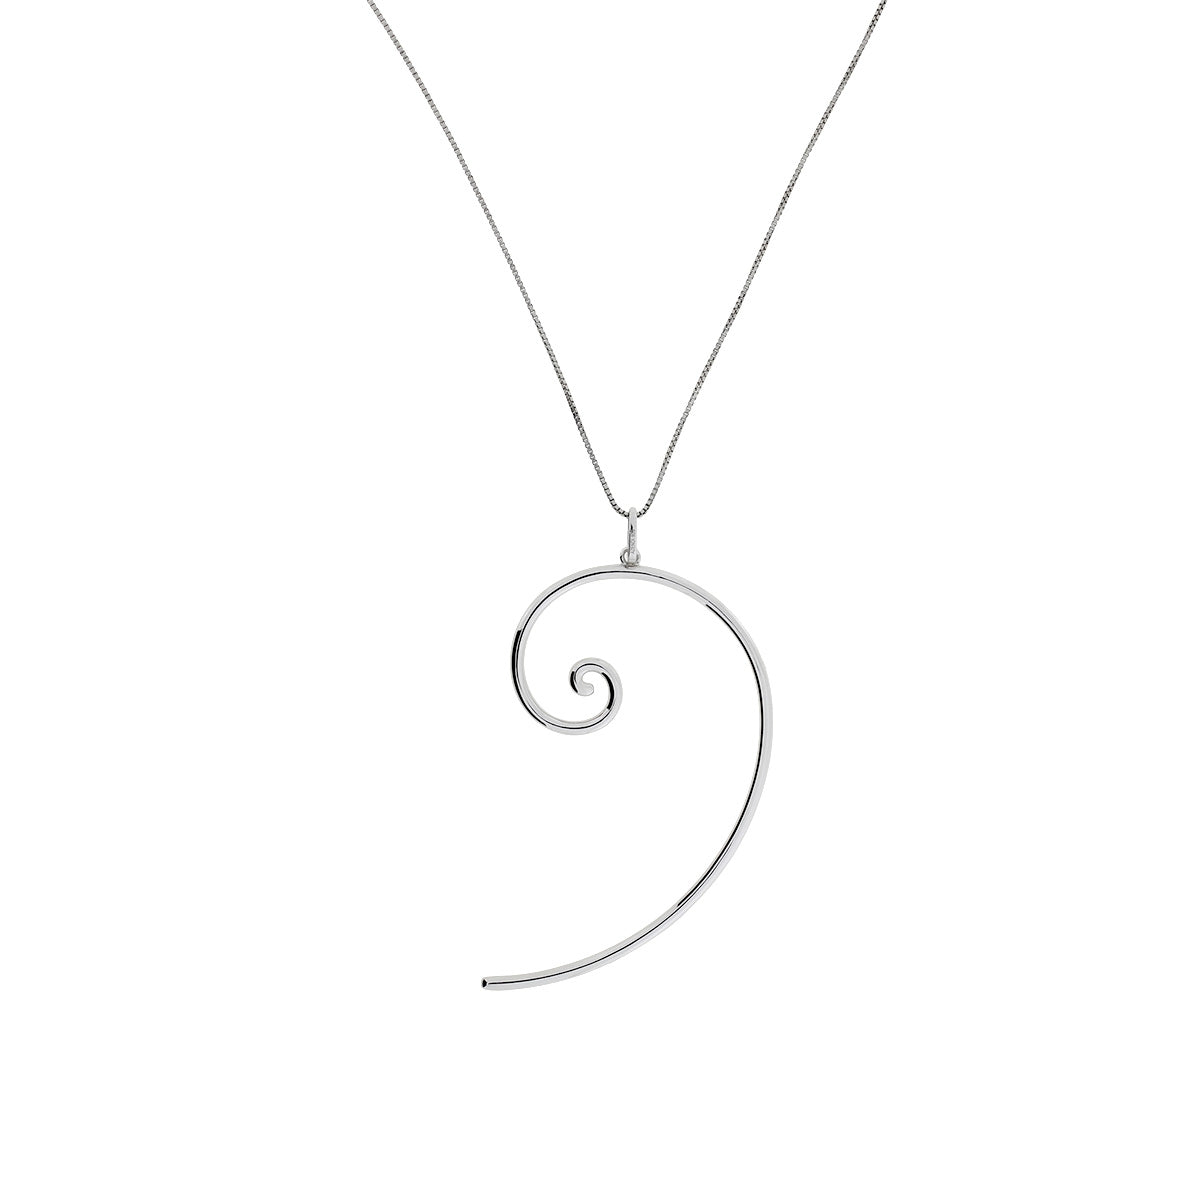 Large Spiral Pendant in Sterling Silver